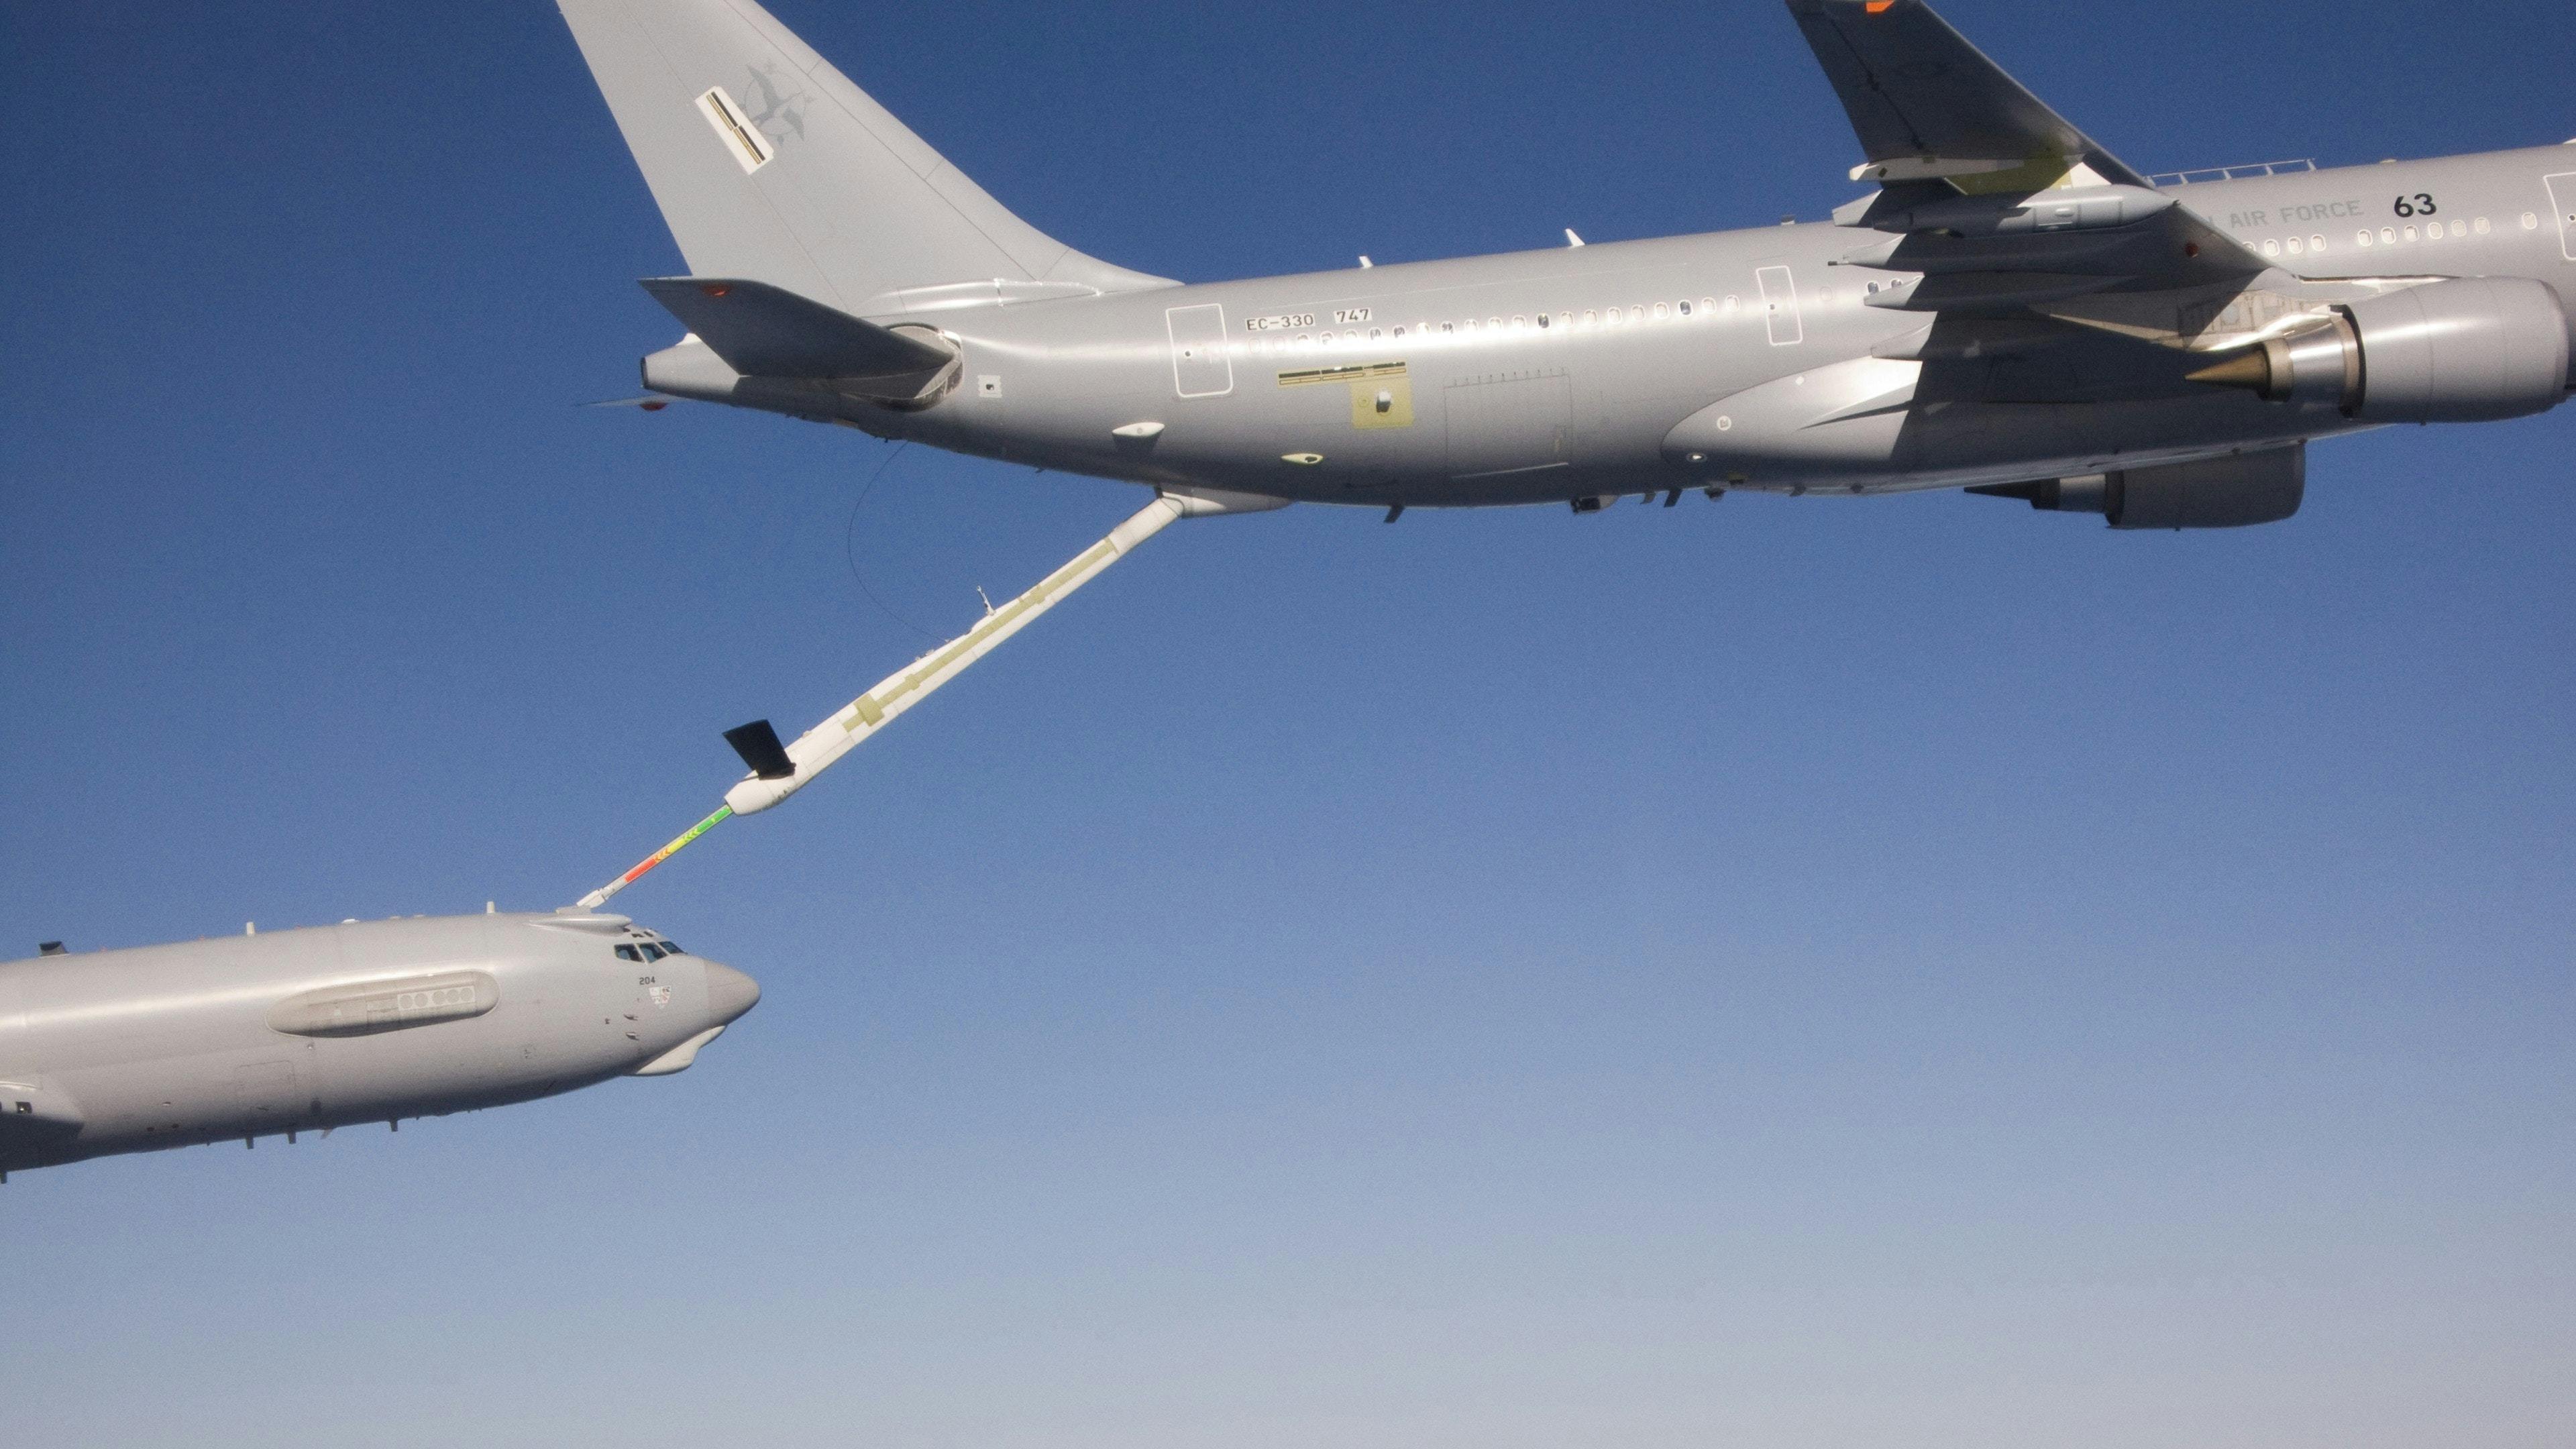 An Australian tanker, the same type of aircraft as Voyager, using its boom to refuel an aircraft.